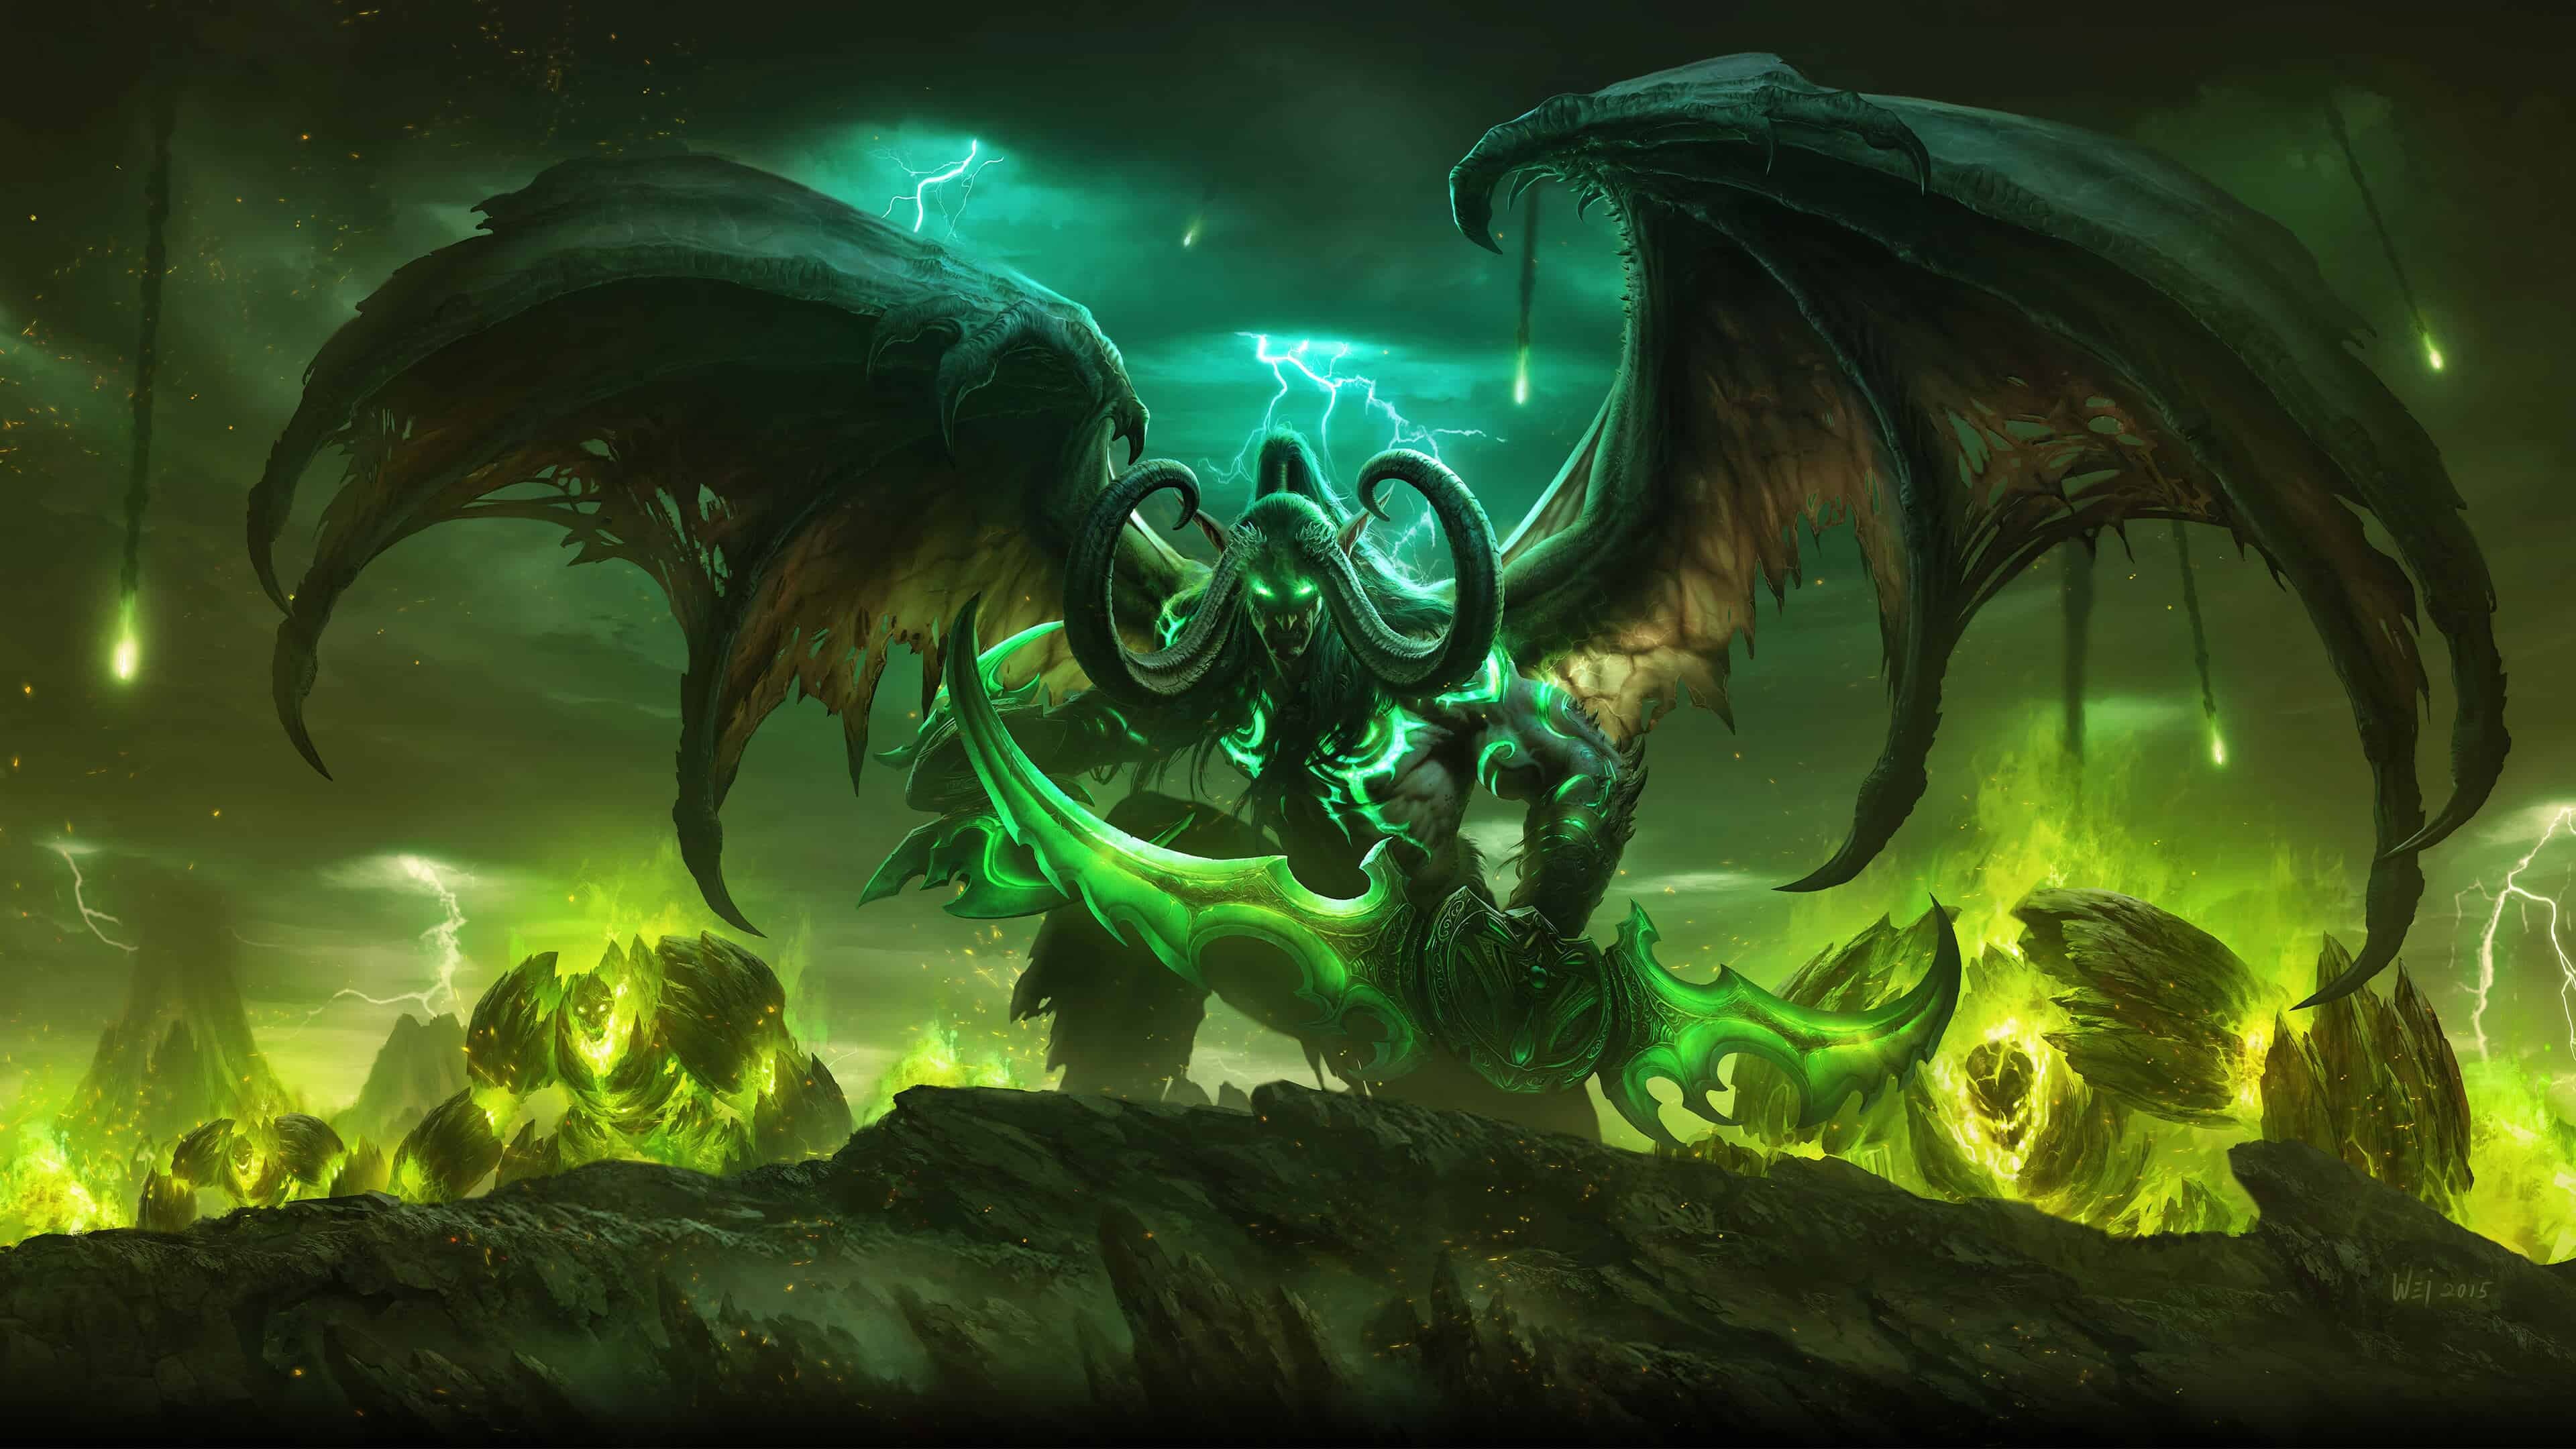 World of Warcraft: WoW Legion, Illidan Stormrage, Demon Hunter and Lord of the Outland. 3840x2160 4K Wallpaper.